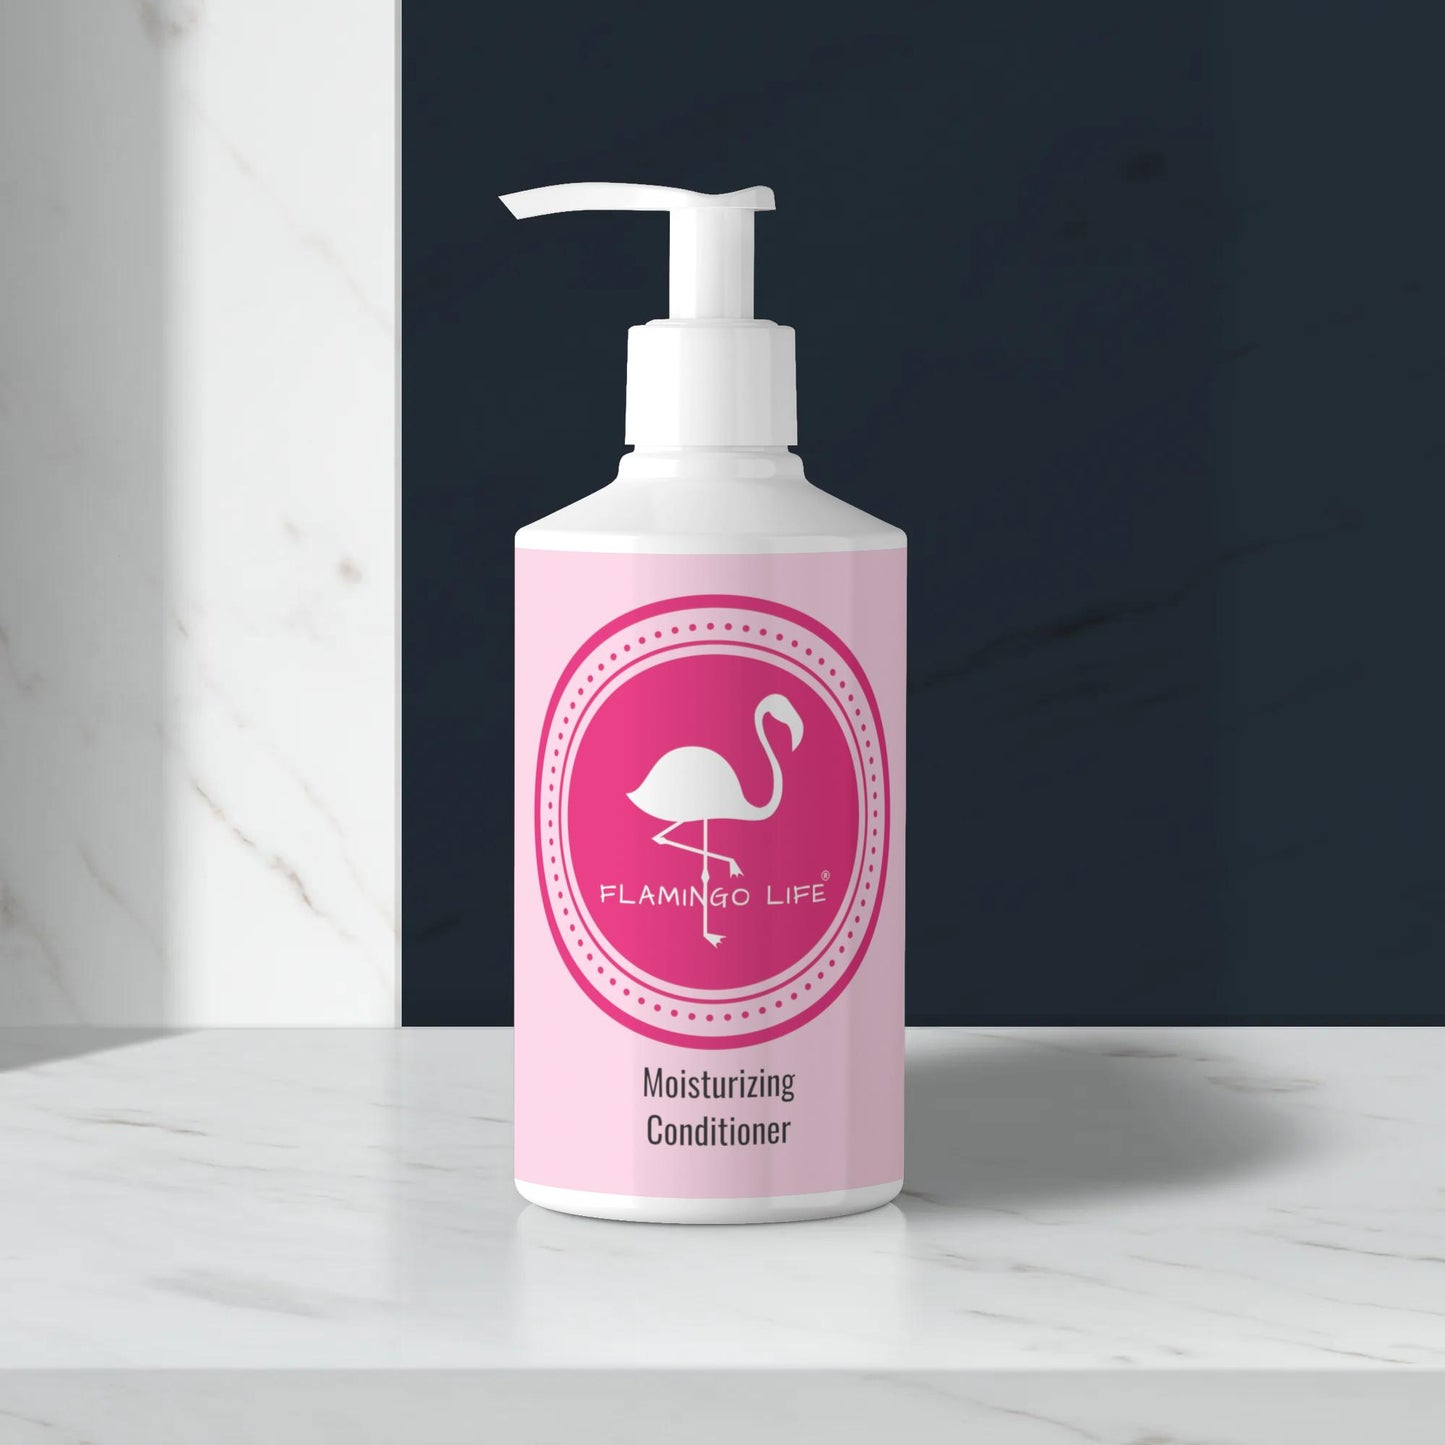 Flamingo Life® Moisturizing Conditioner with Argan Oil and Wheat protein